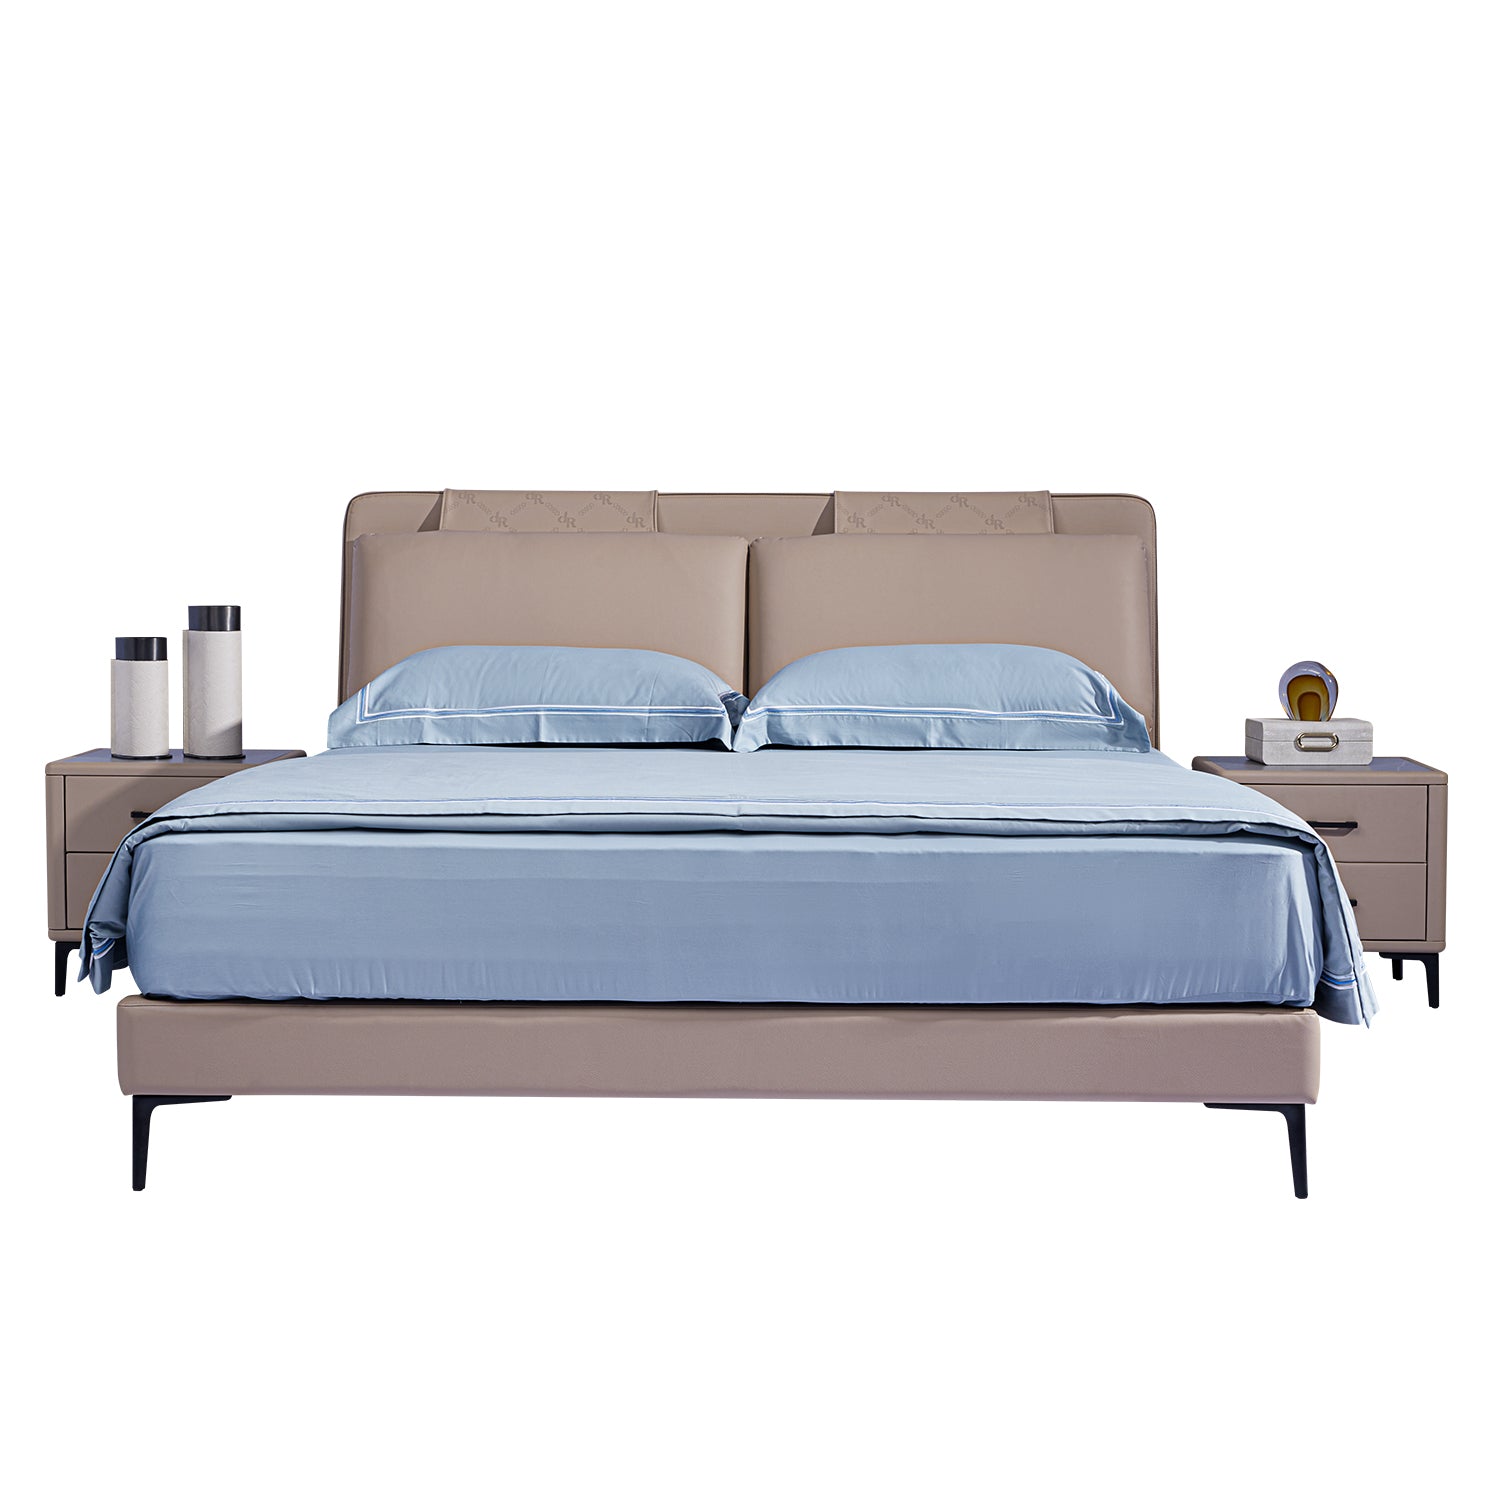 DeRUCCI BOC1 - 006 bed frame with beige upholstered headboard, blue bedding, and two matching nightstands with decorations. Modern and sleek bedroom furniture set.